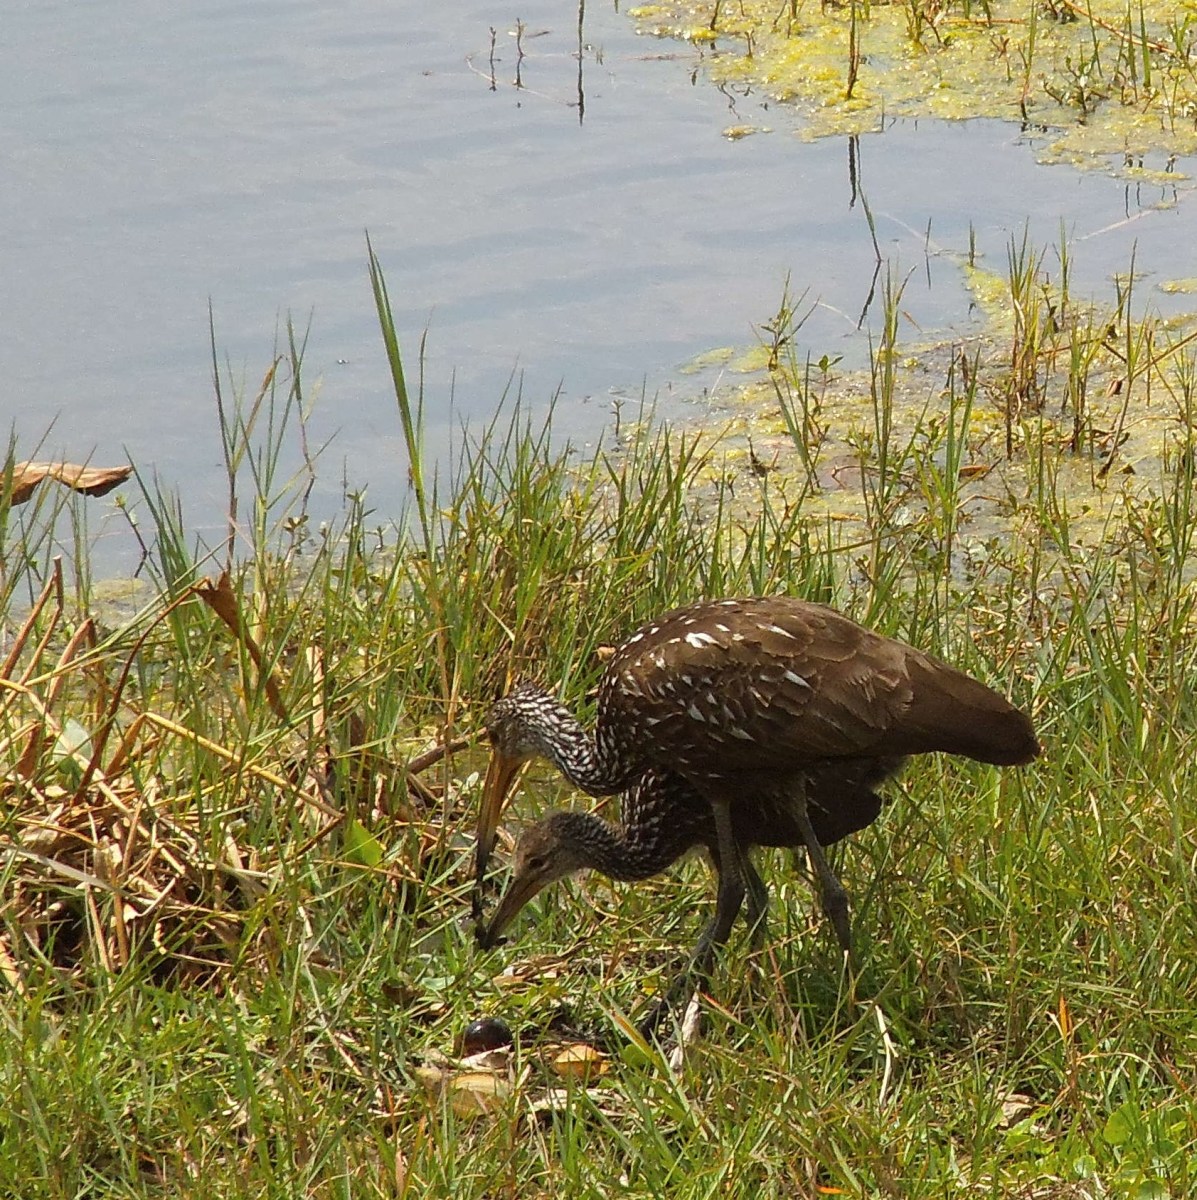 Limpkin chick eating a mussel shared by a parent. Photo taken in Central Florida.